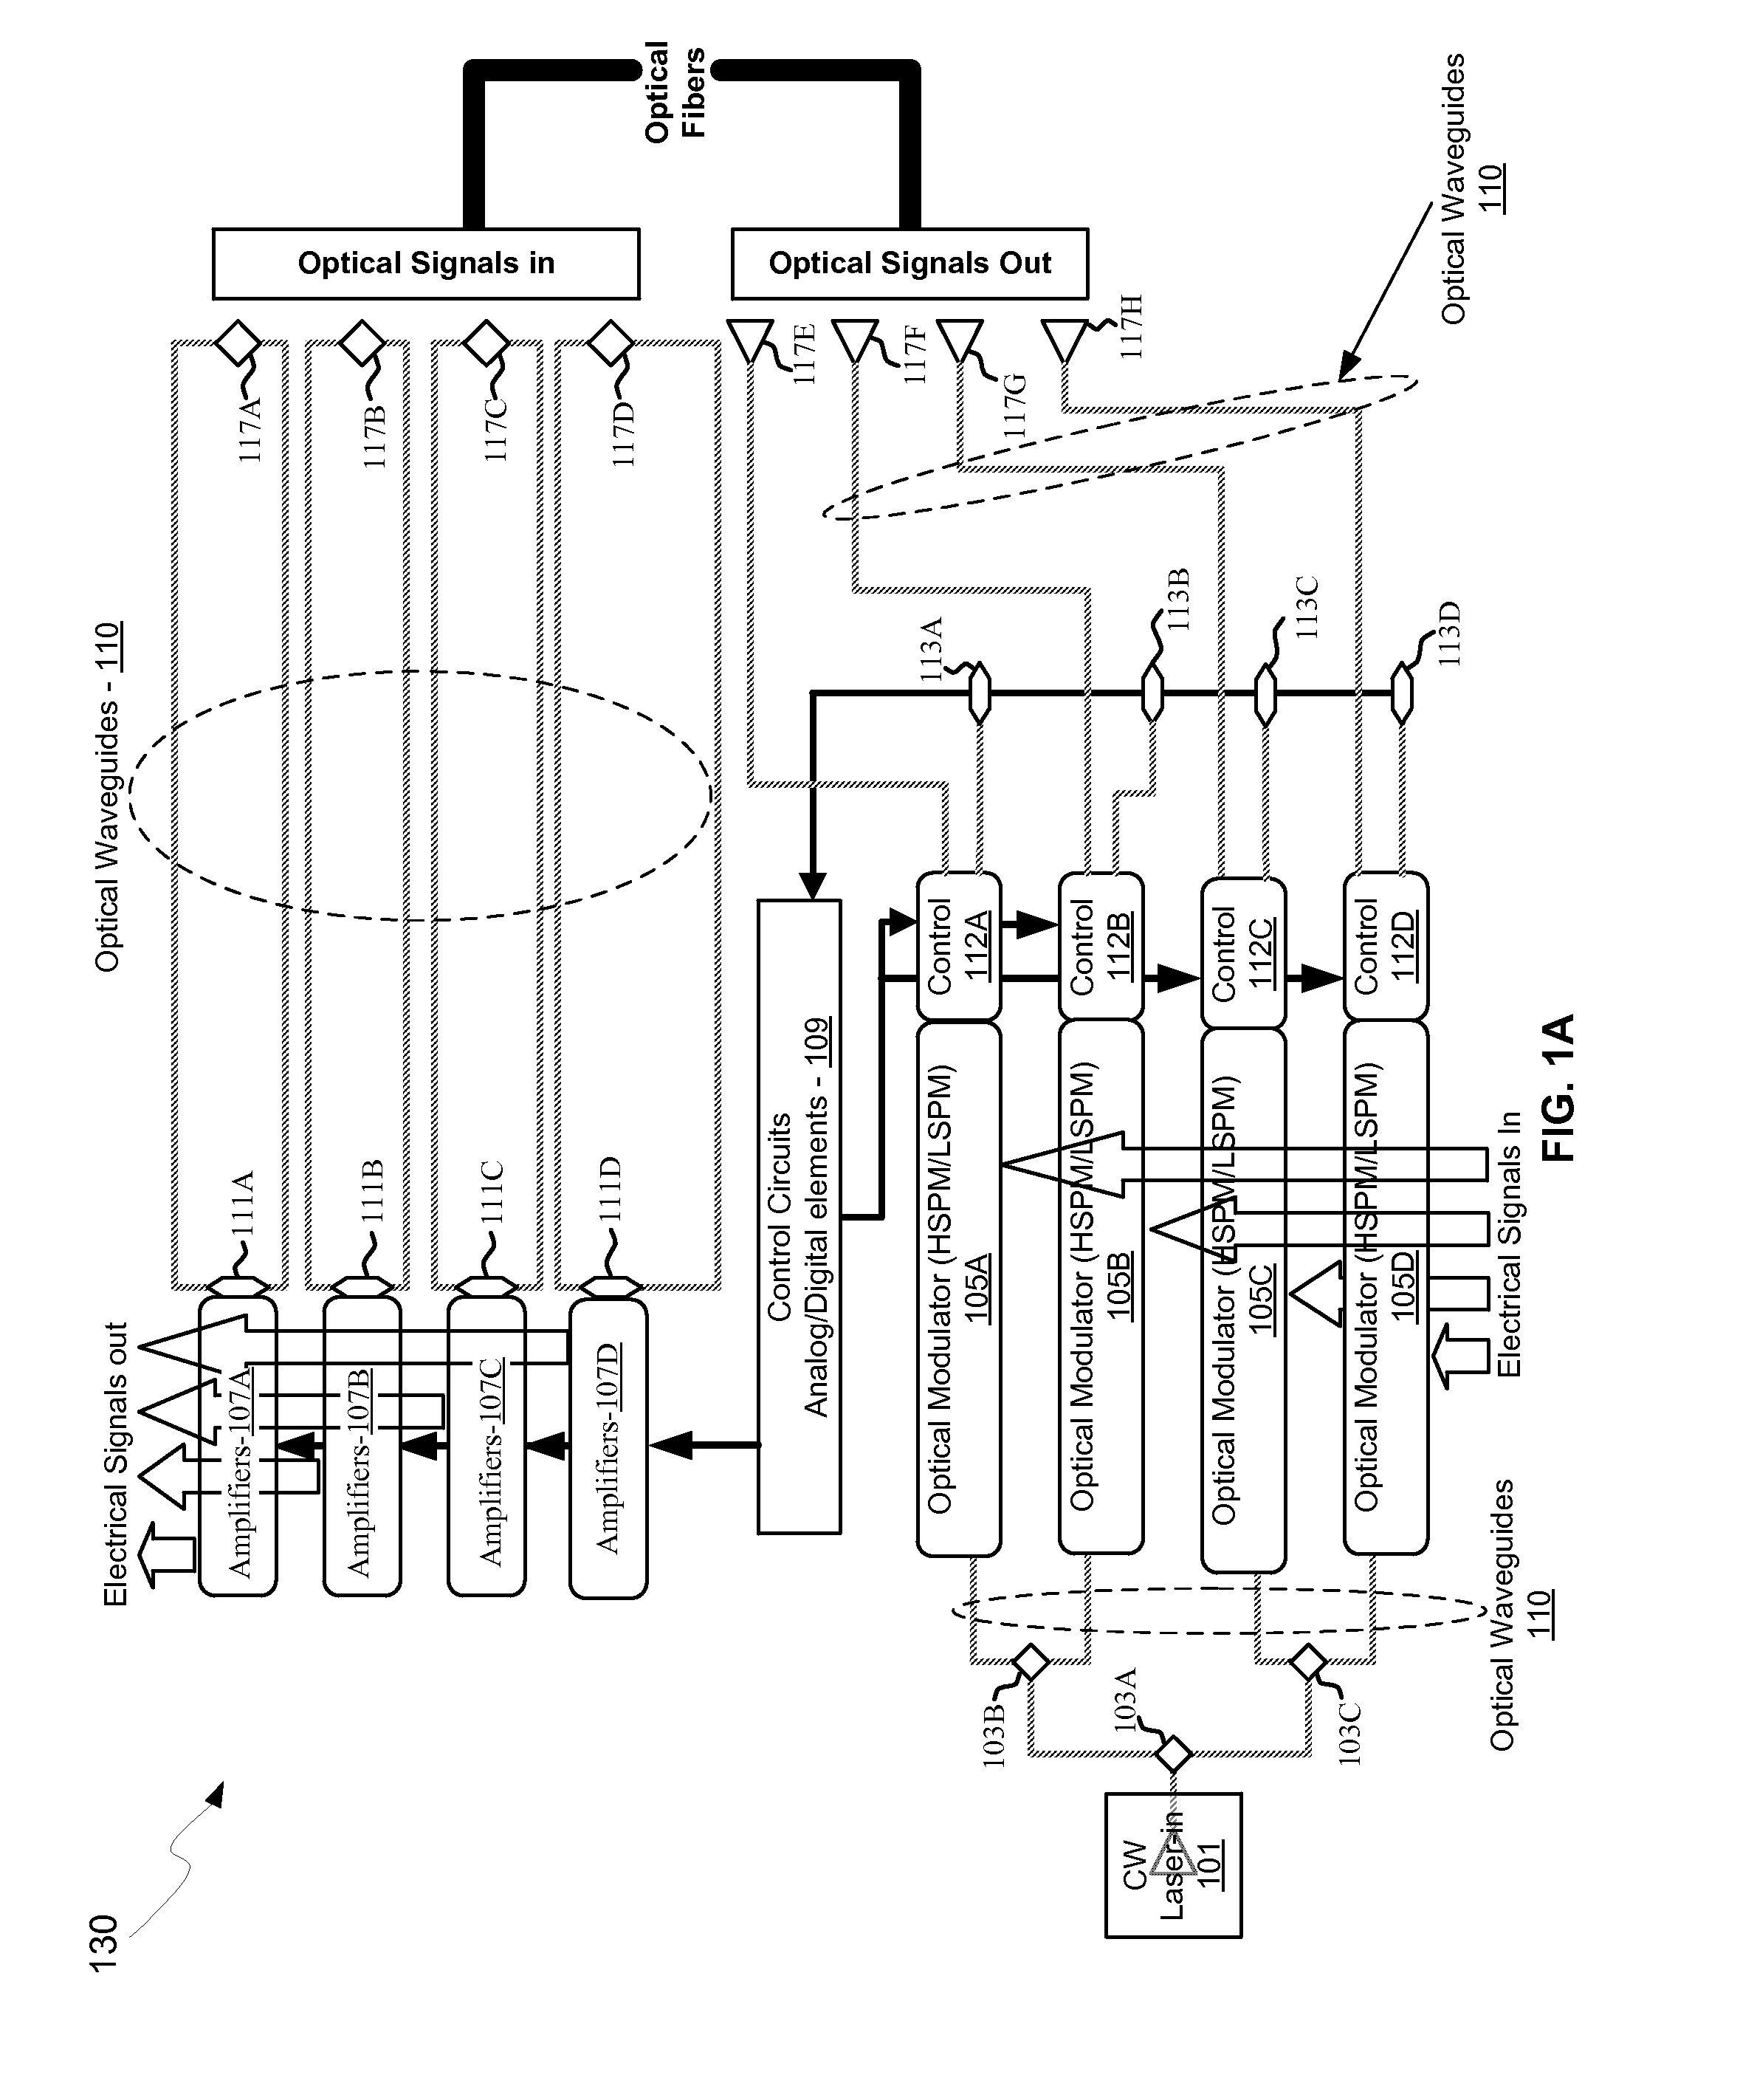 Method and system for an optoelectronic built-in self-test system for silicon photonics optical transceivers